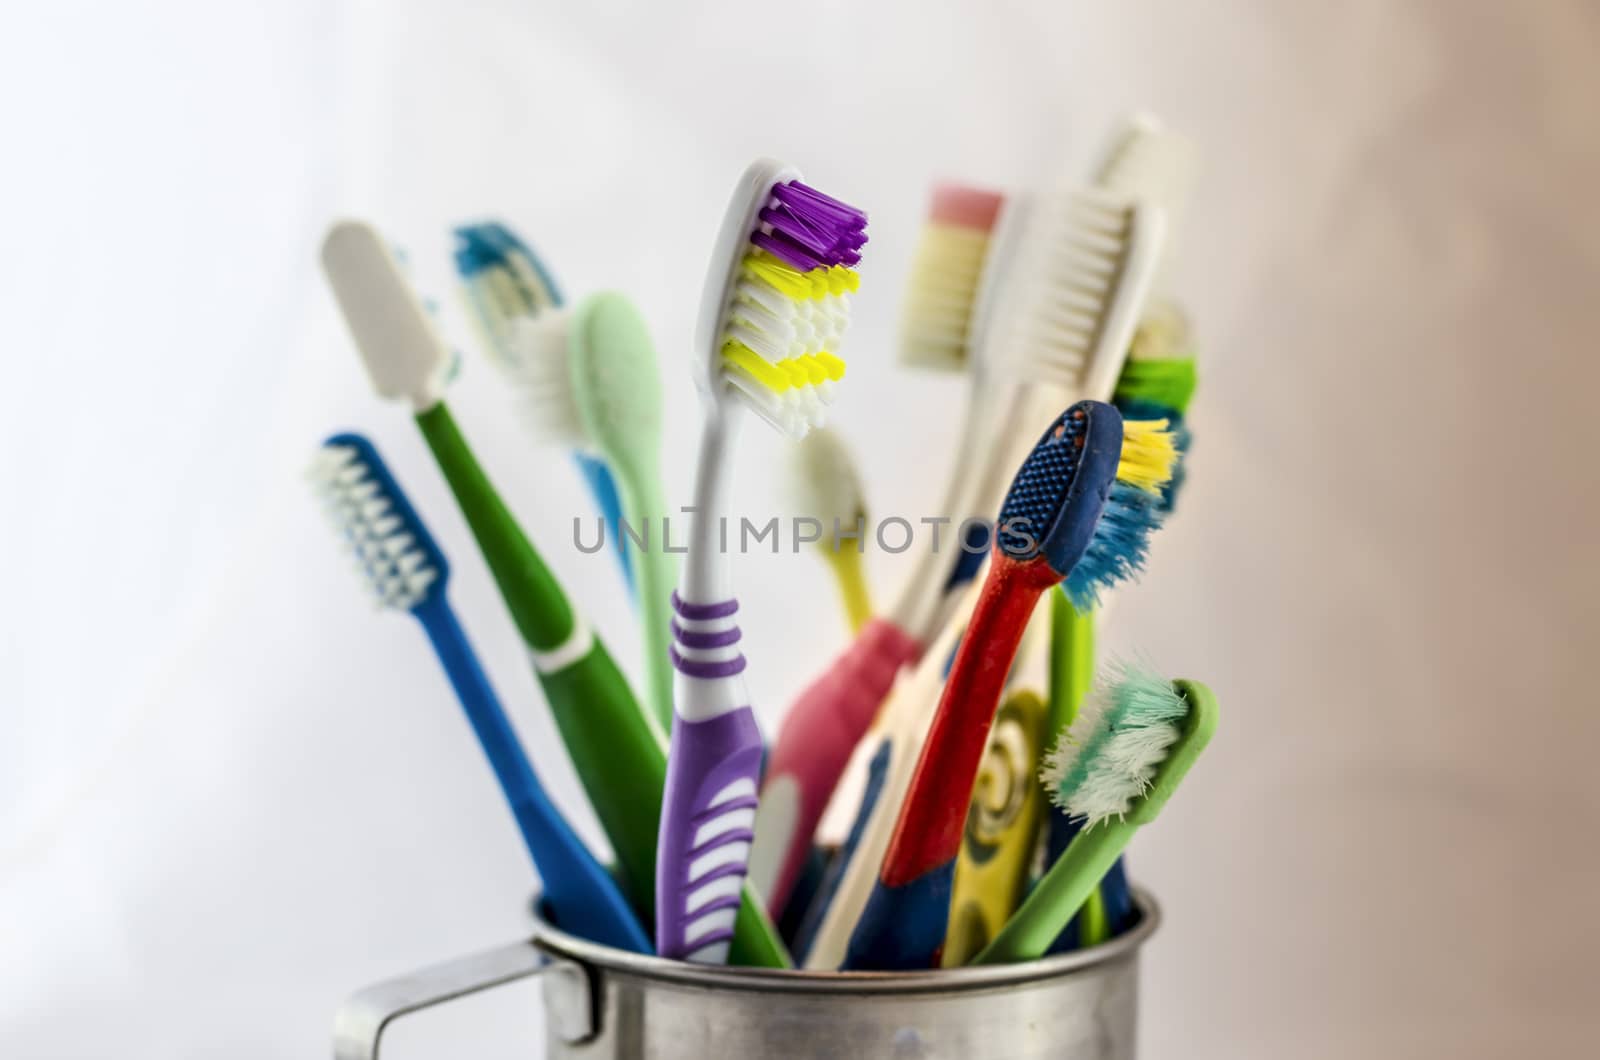 close up image of color full old toothbrush